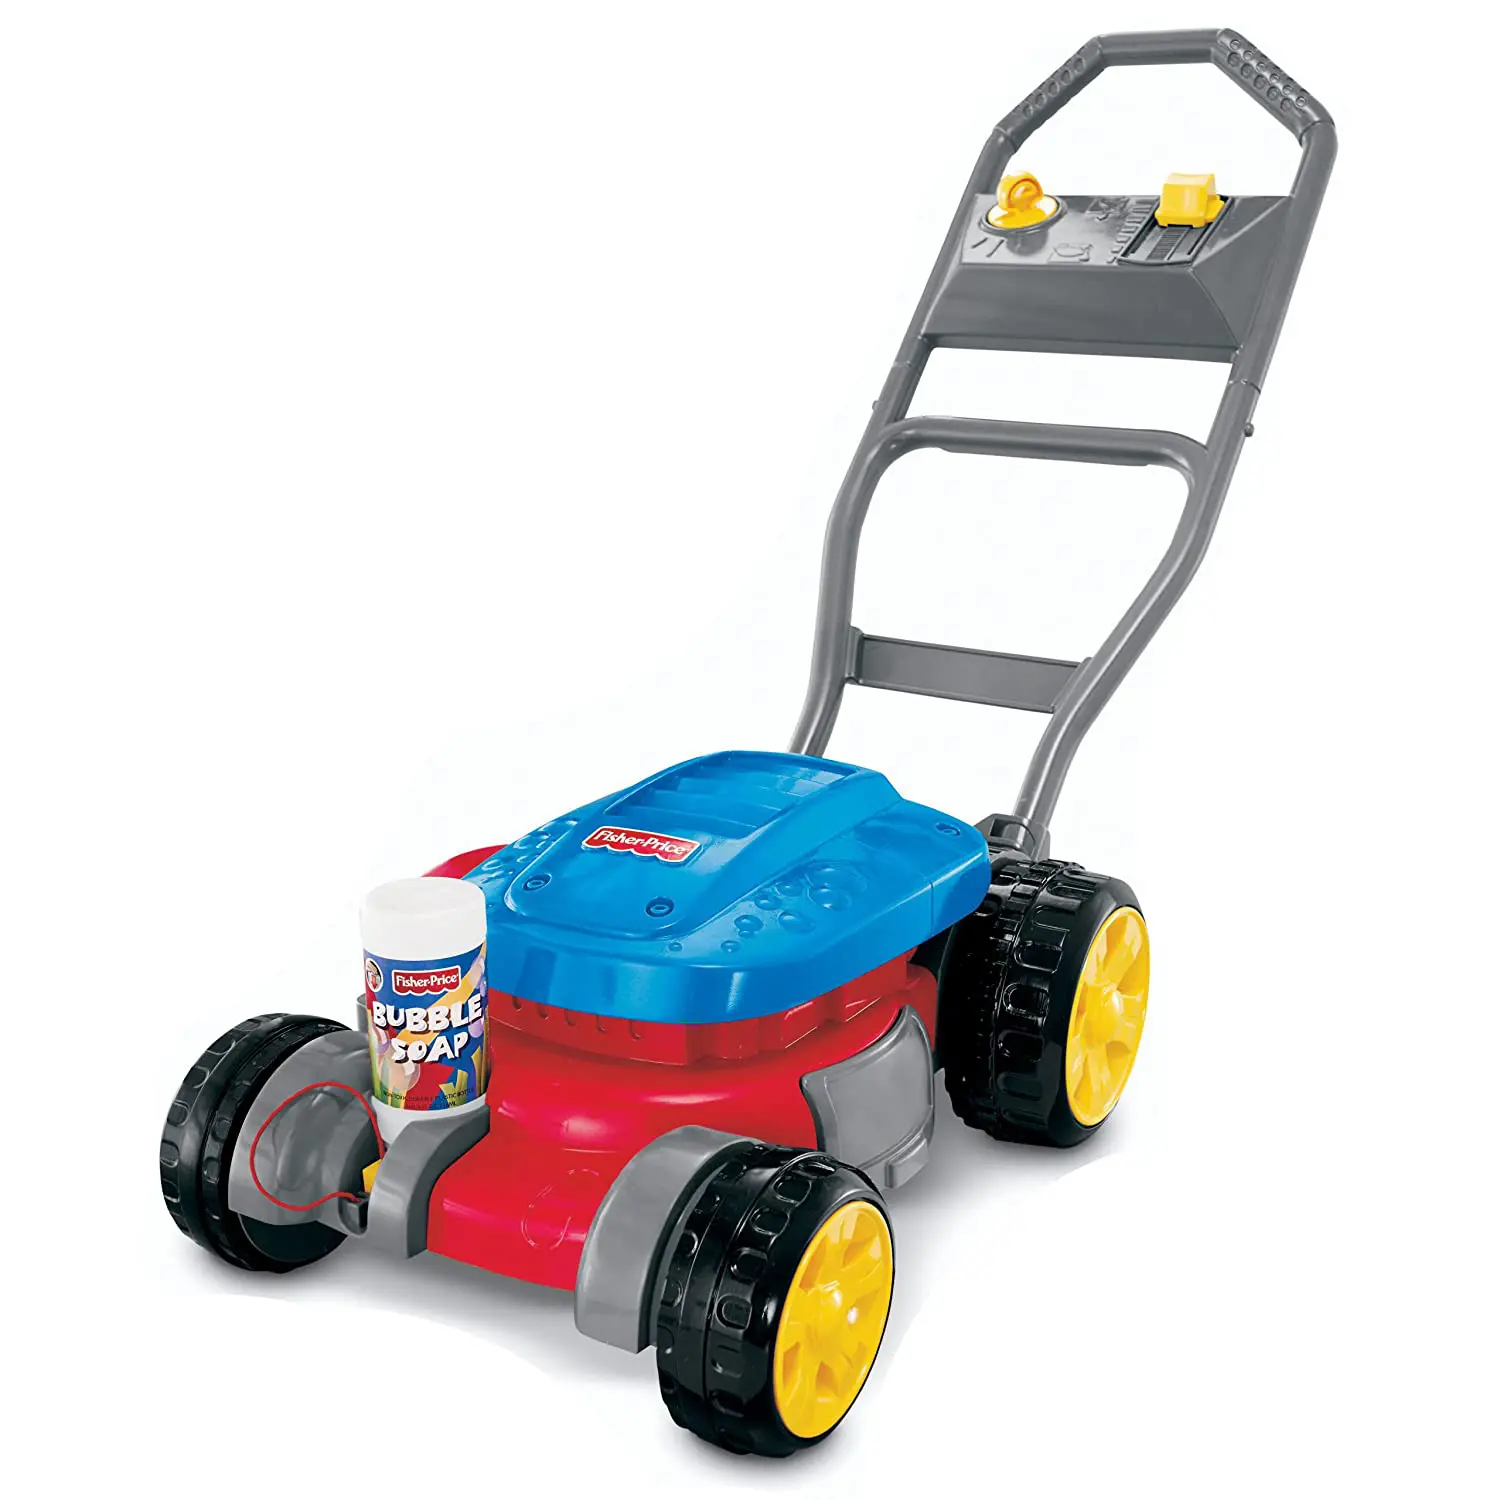 9 Best Bubble Lawn Mower for Kids & Toddlers 2023 - Reviews 1